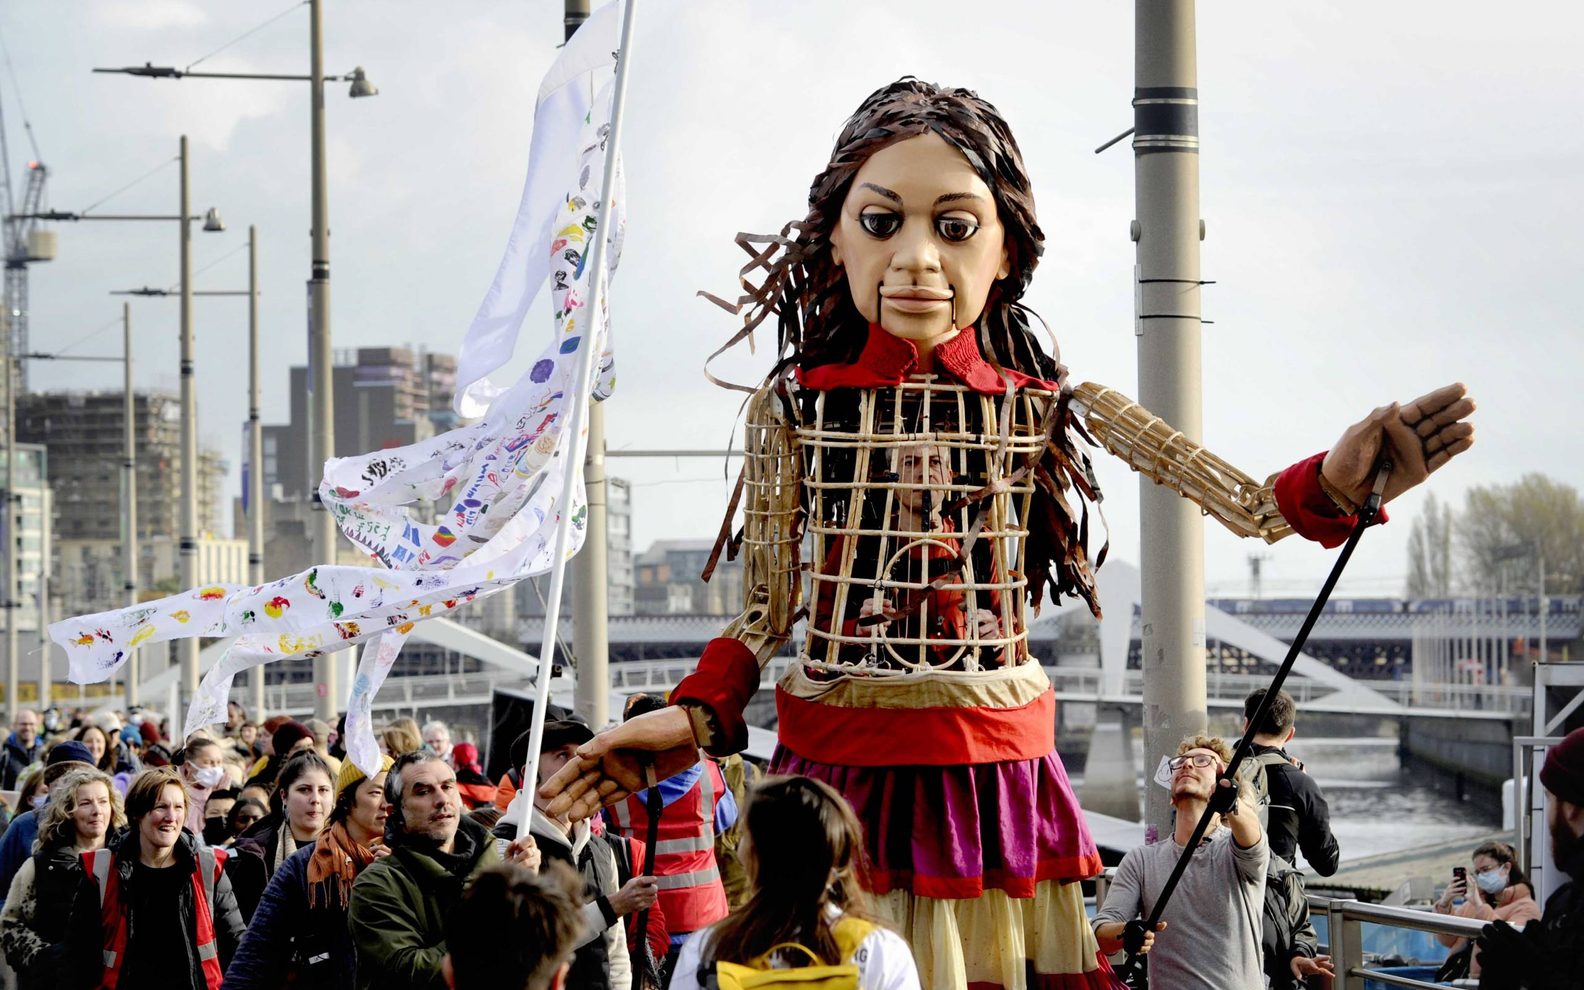 A large wicker puppet of a young girl walks along the street in Glasgow. She is surrounded by people who are looking at her and waving flags.